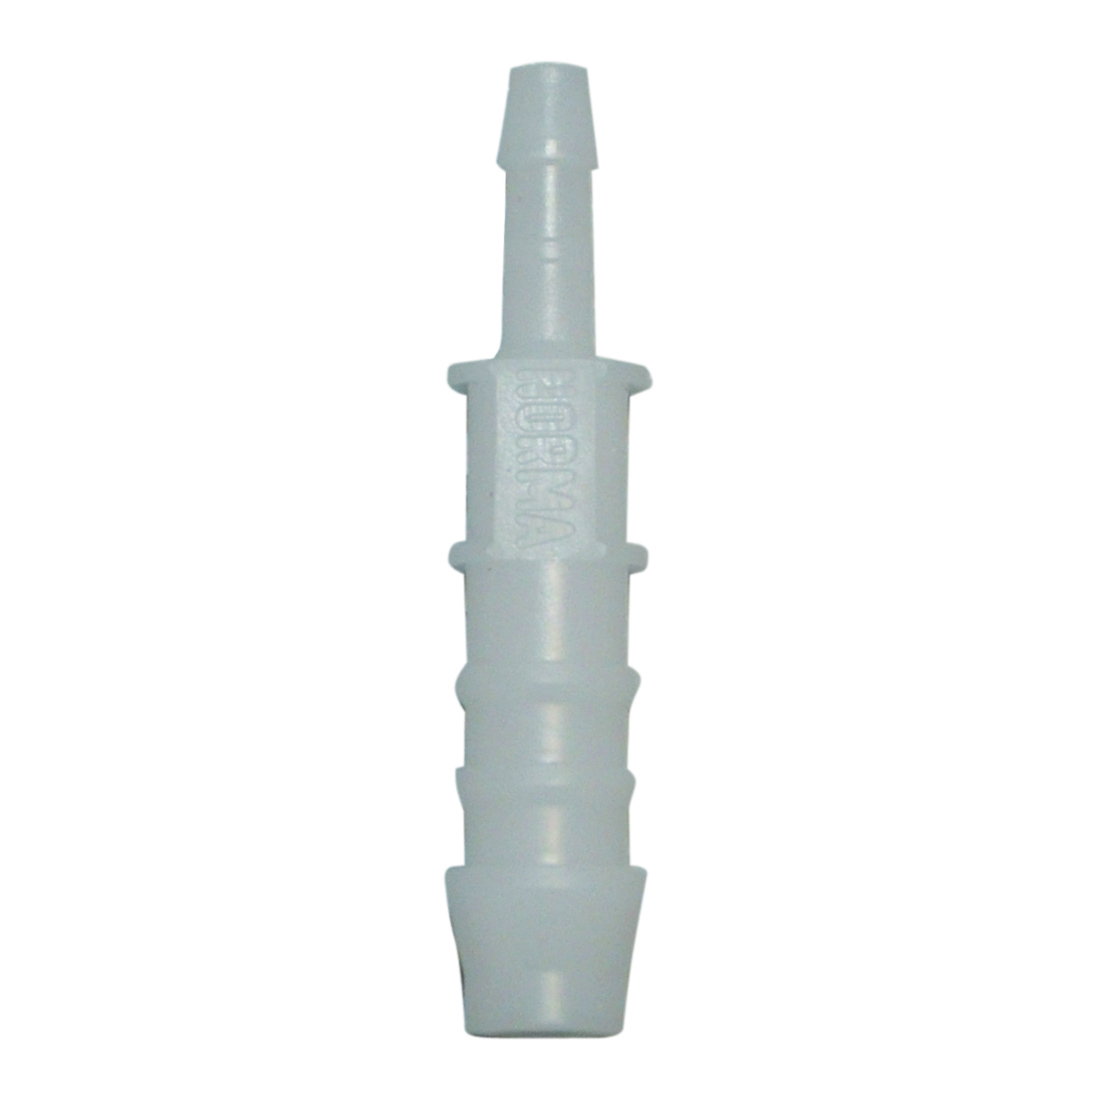 Straight hose connector 8 - 4 mm plastic